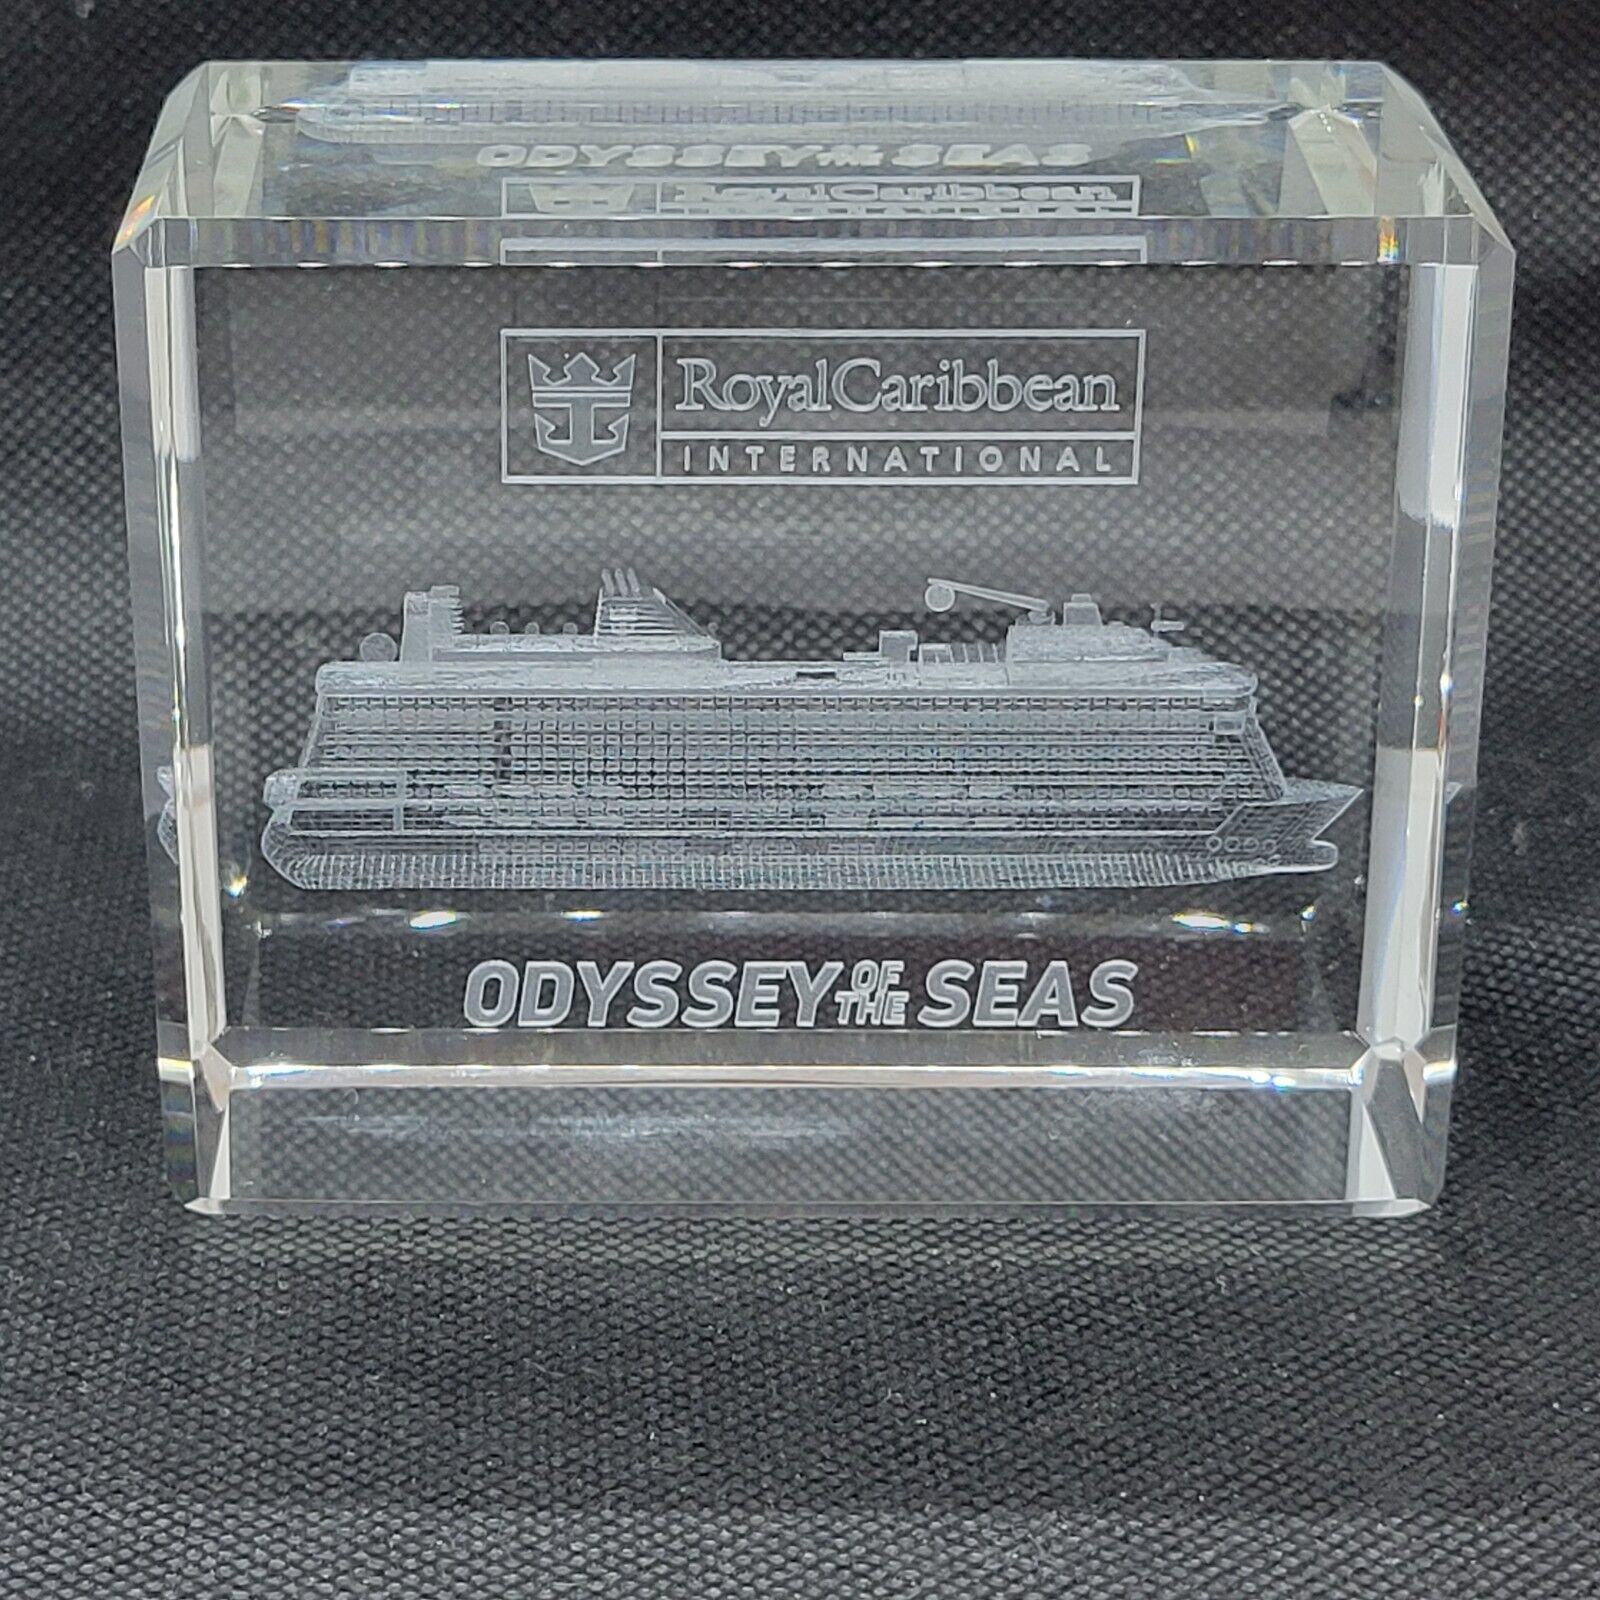 Royal Caribbean 3D Etched Crystal Block ODYSSEY OF THE SEAS